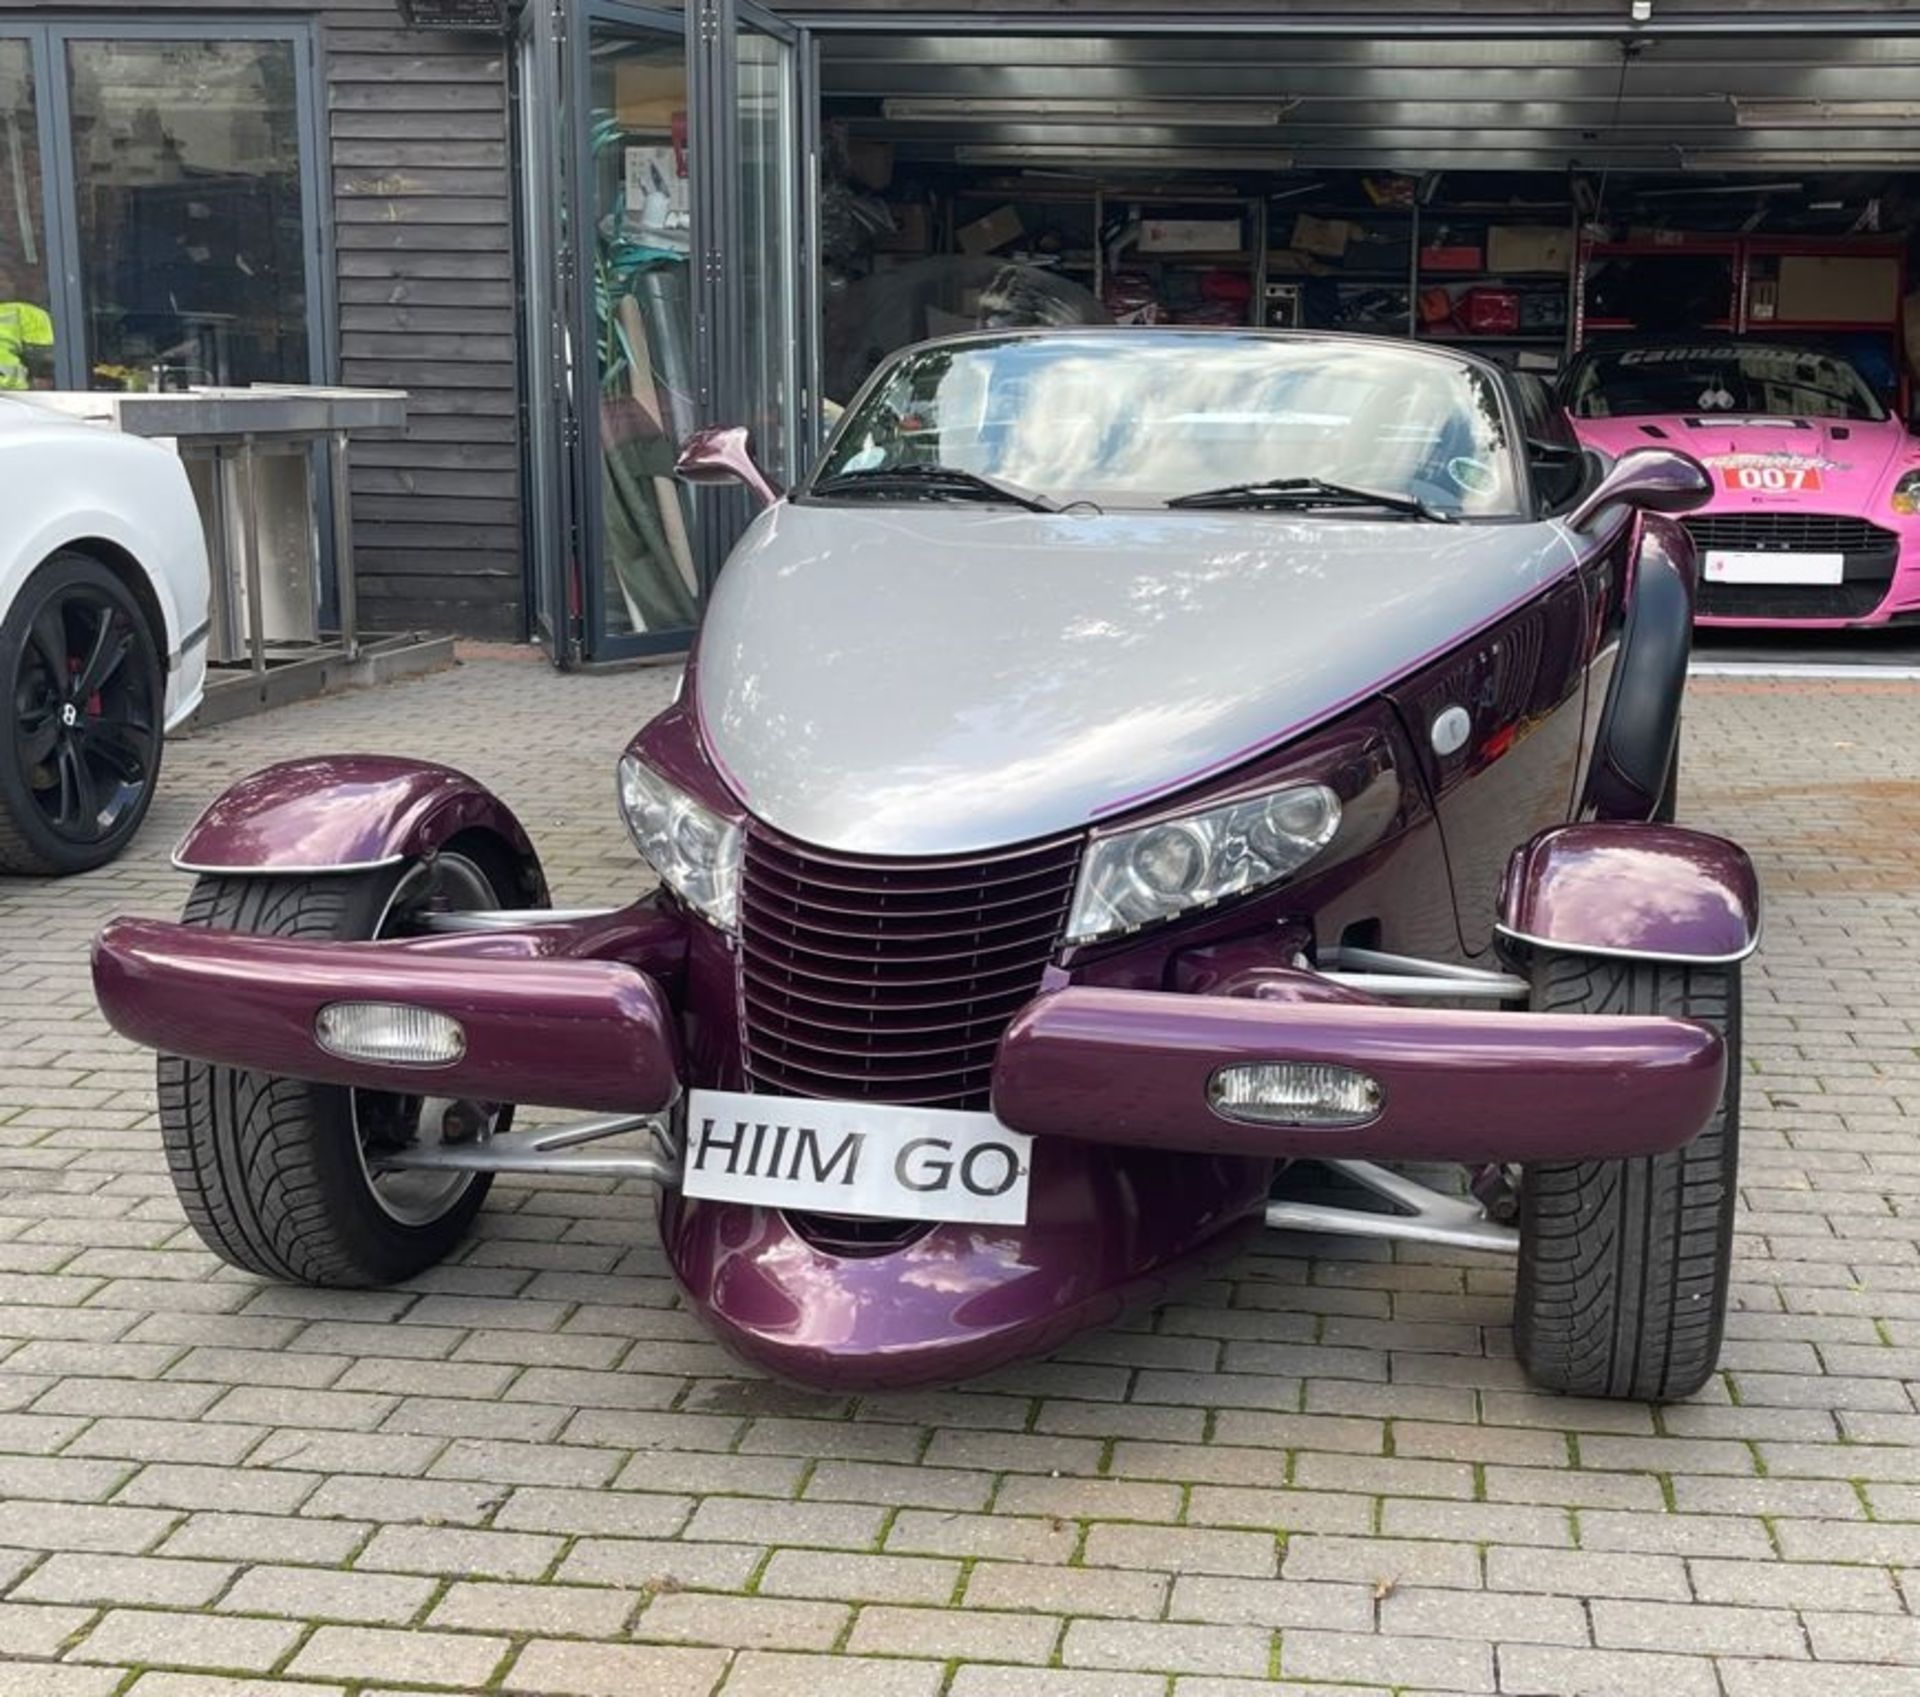 1998 CHRYSLER PLYMOUTH PROWLER V6 2 DOOR CONVERTIBLE, 3500cc PETROL ENGINE, AUTO *NO VAT* - Image 16 of 32